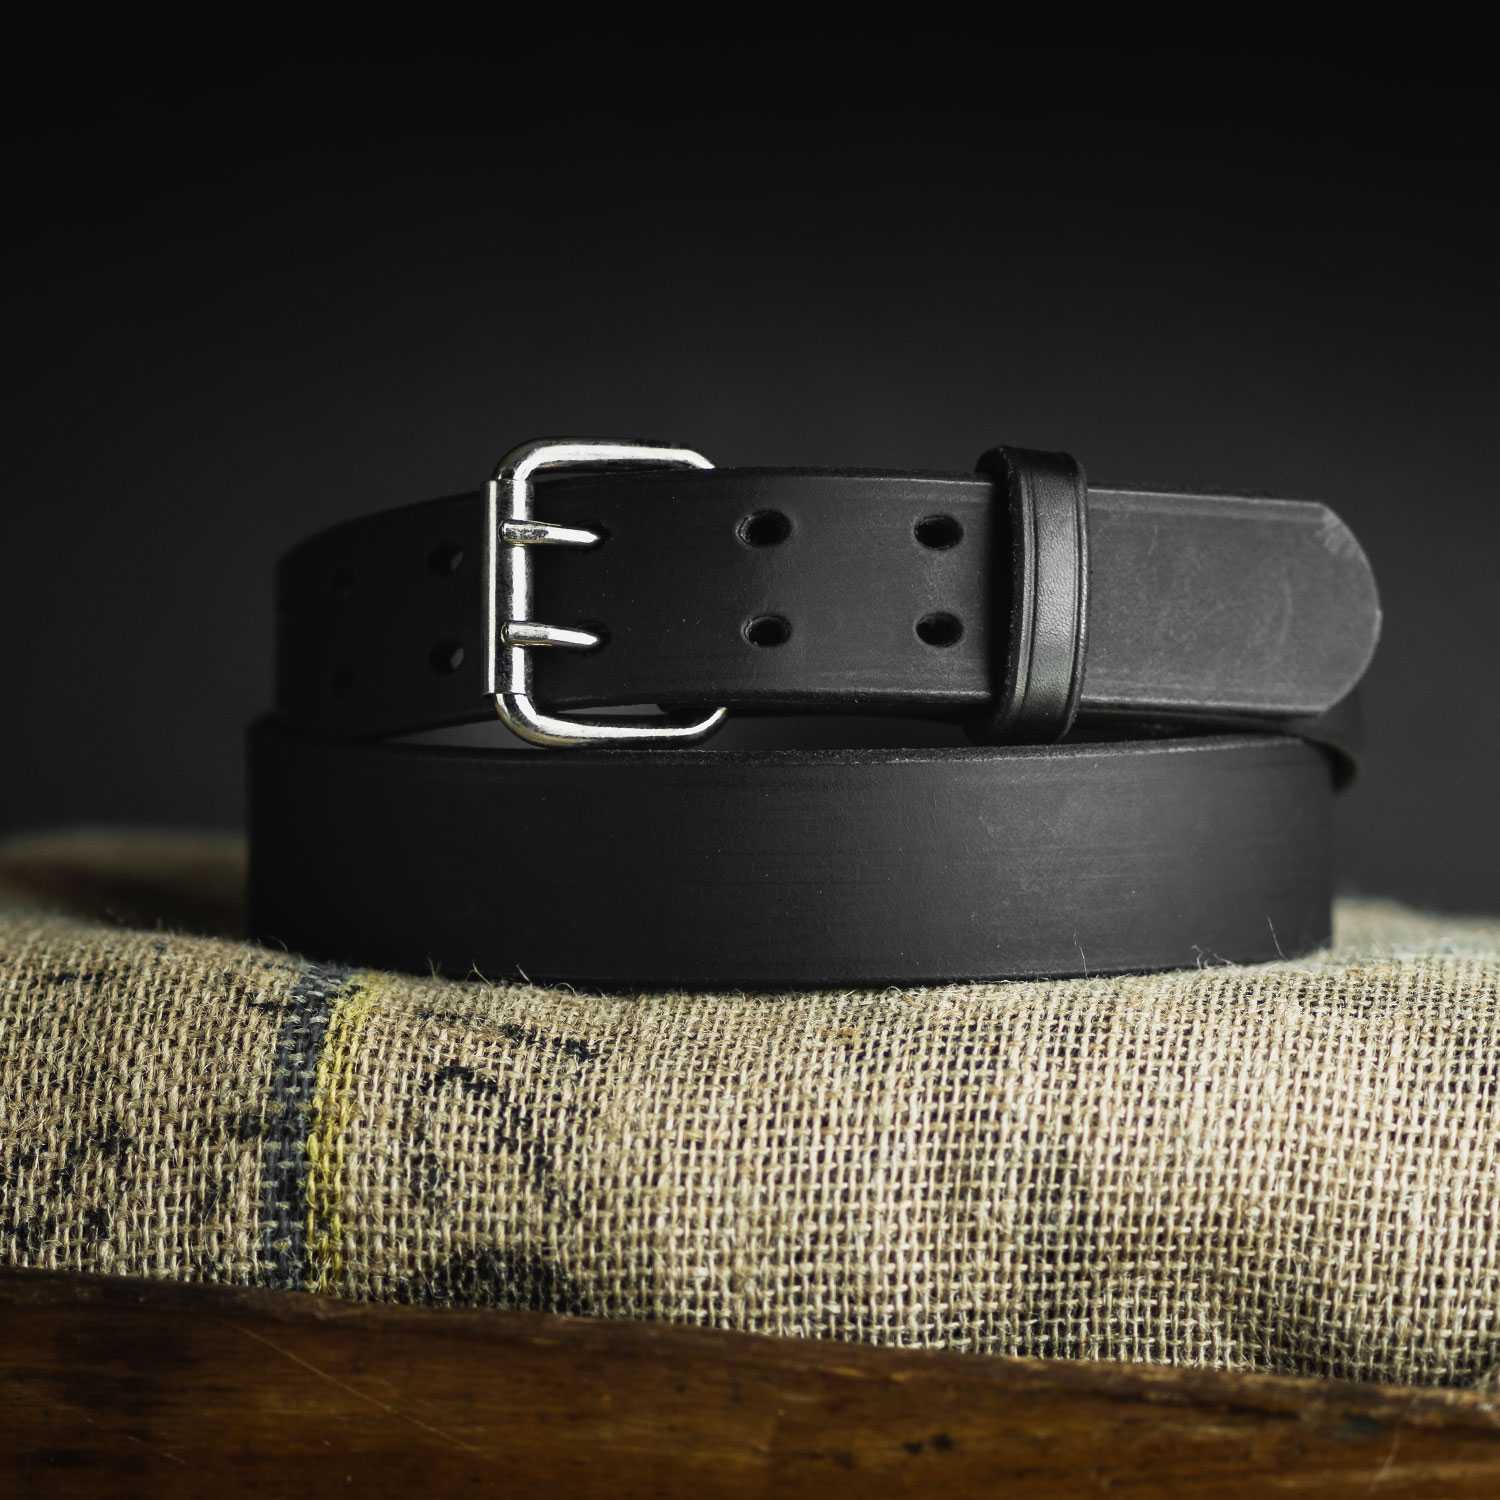 CLASSIC NATURAL 1.5 Leather Belt